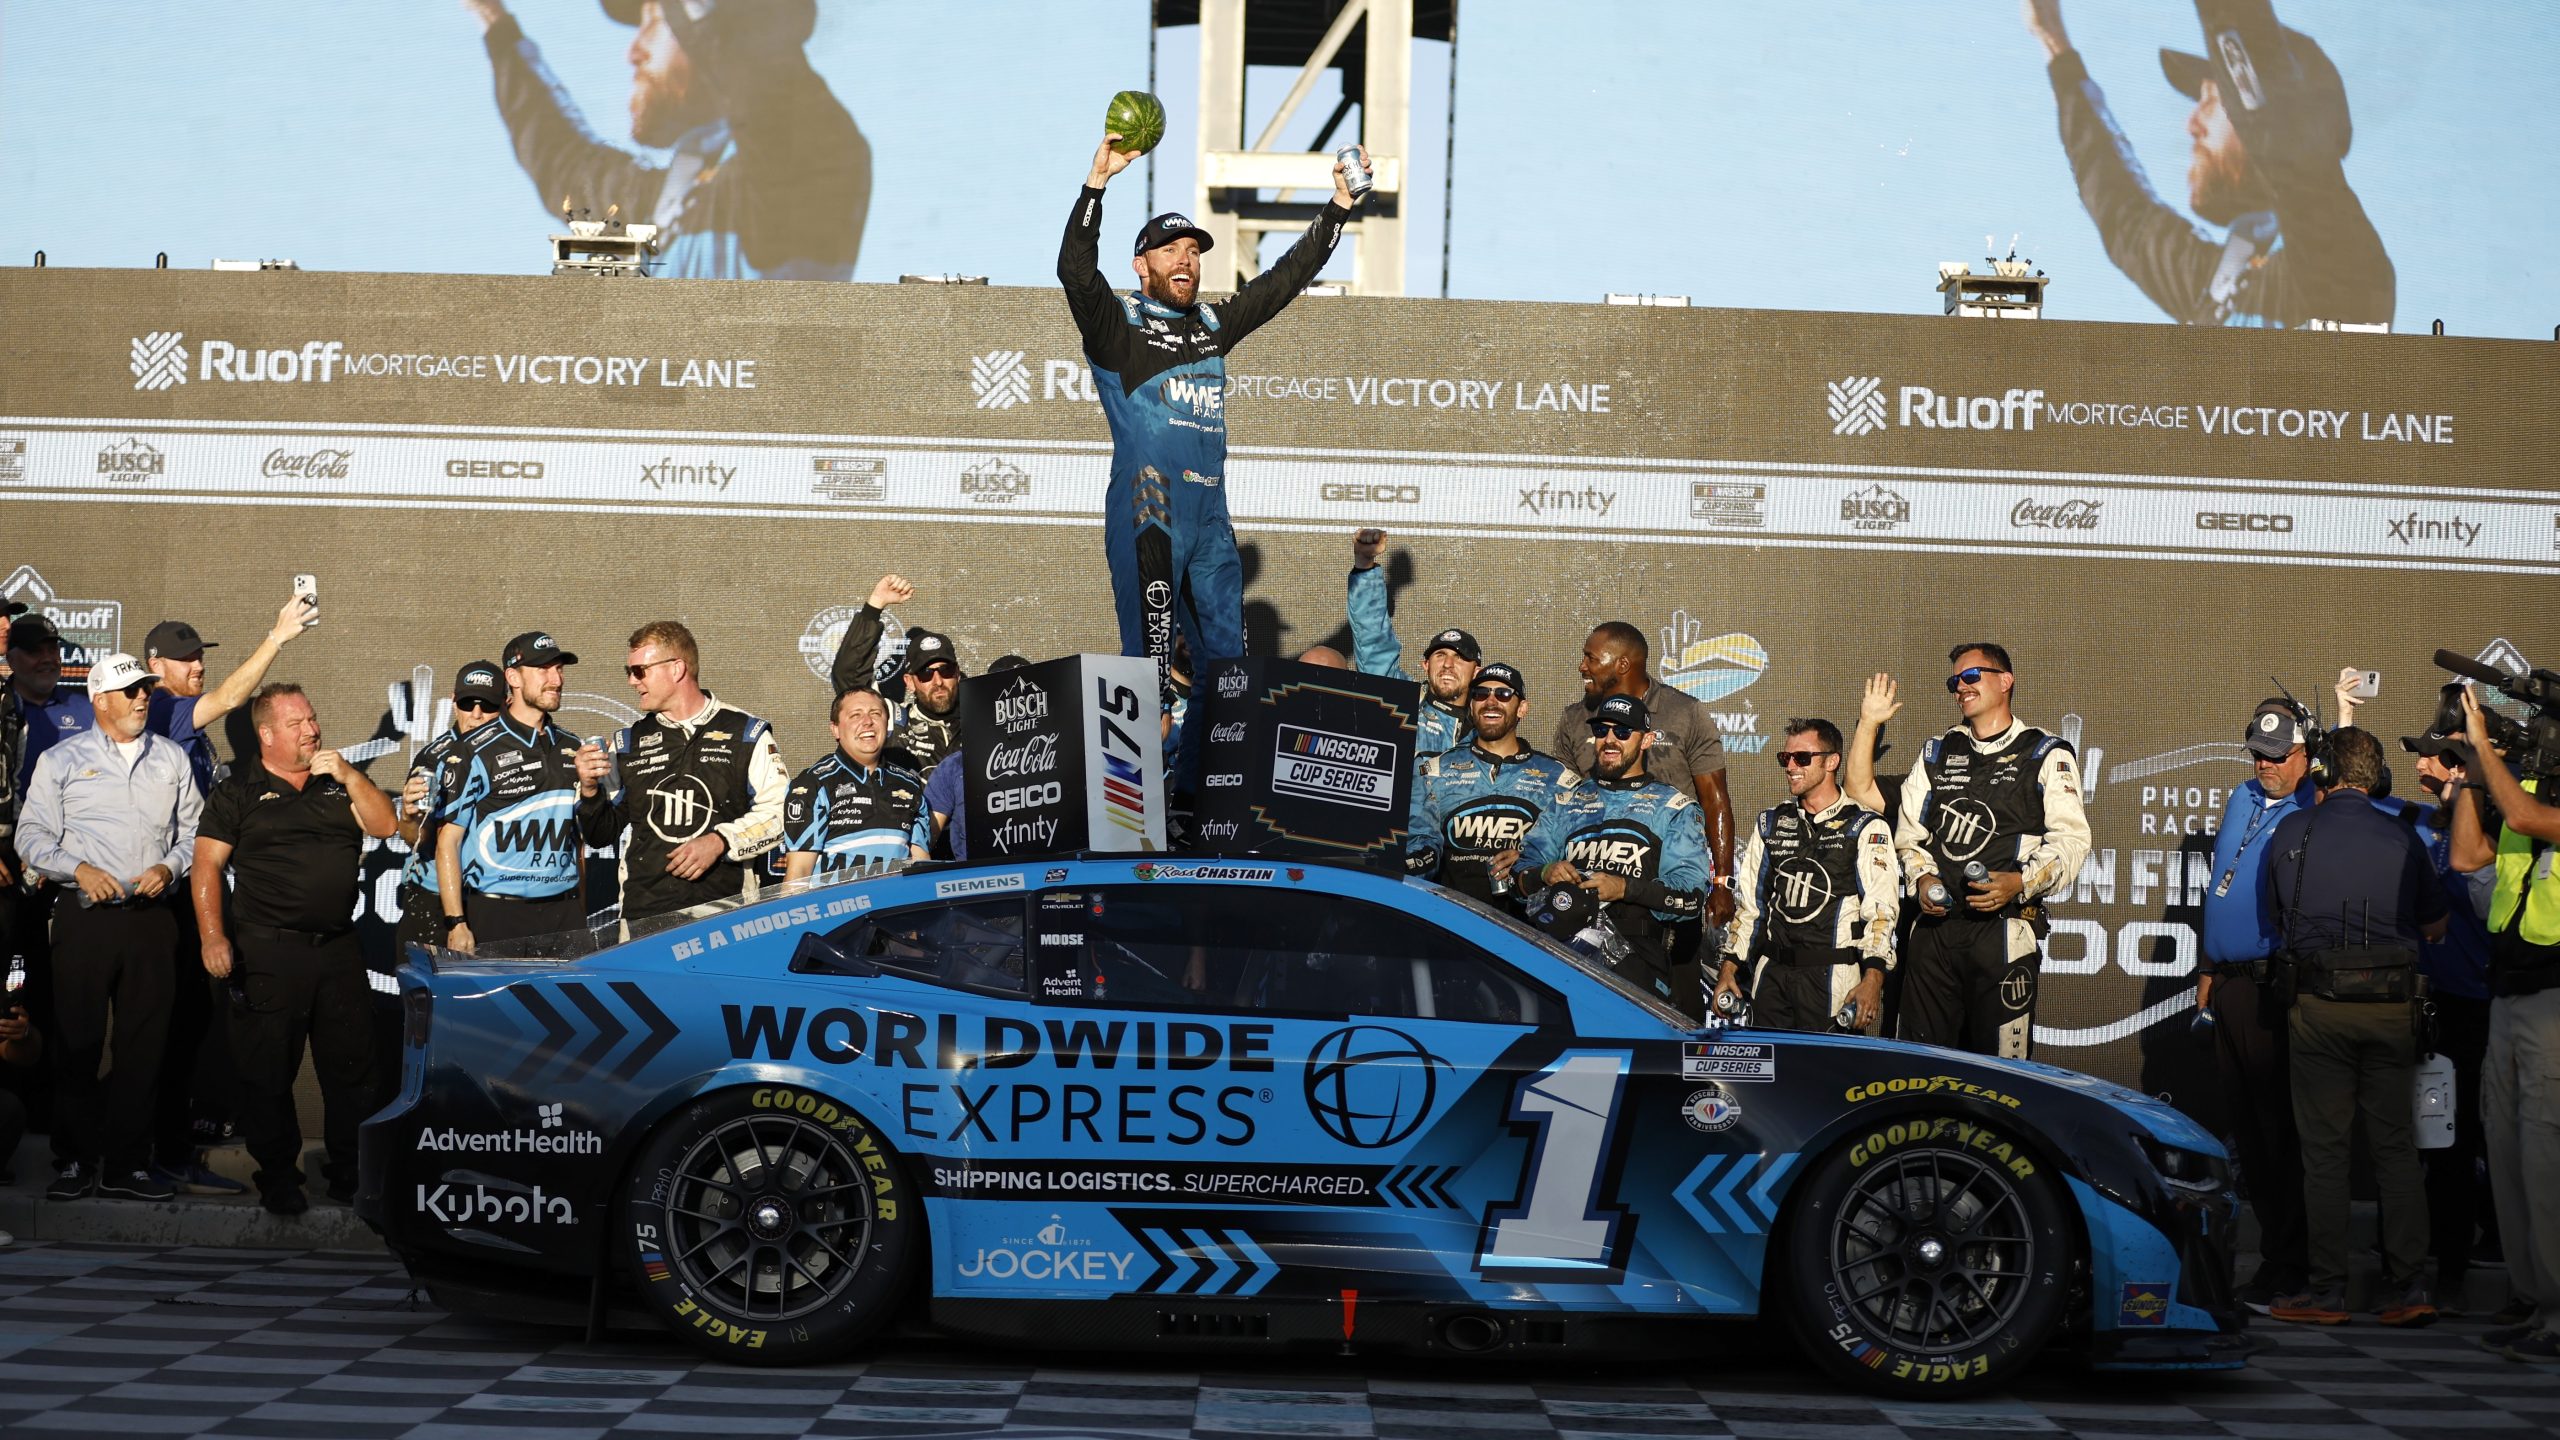 AVONDALE, ARIZONA - NOVEMBER 05: Ross Chastain, driver of the #1 Worldwide Express Chevrolet, celebrates in victory lane after winning the NASCAR Cup Series Championship race at Phoenix Raceway on November 05, 2023 in Avondale, Arizona. (Photo by James Gilbert/Getty Images)